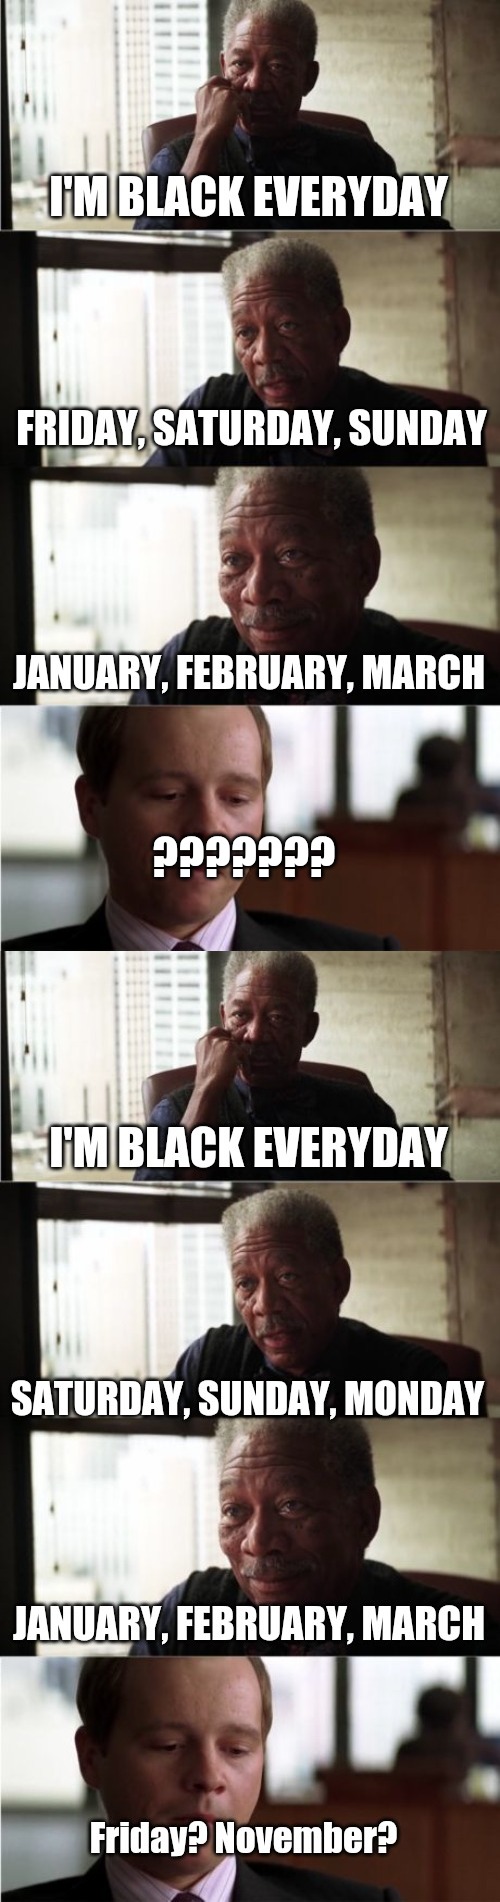 I'm black every day, every month | ??????? | image tagged in morgan freeman,black lives matter | made w/ Imgflip meme maker